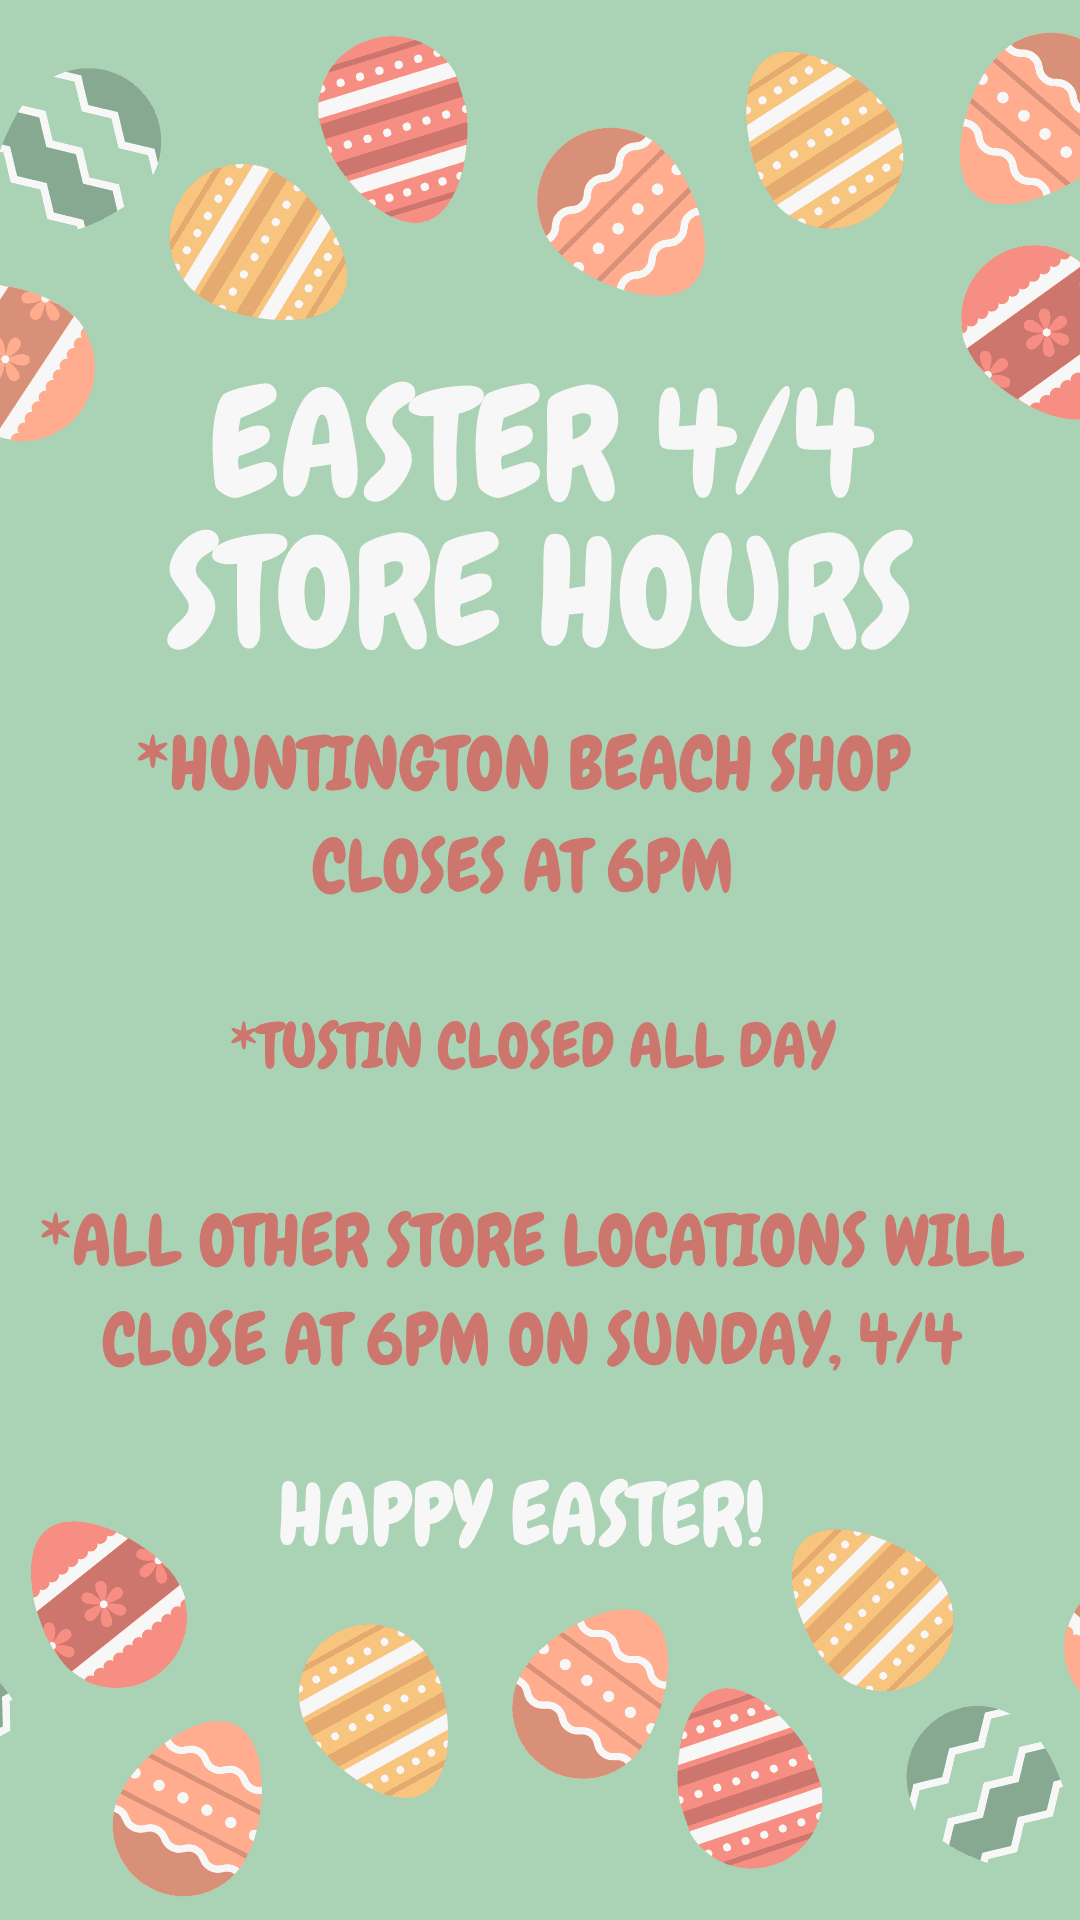 Easter store hours | Jack's Surfboards